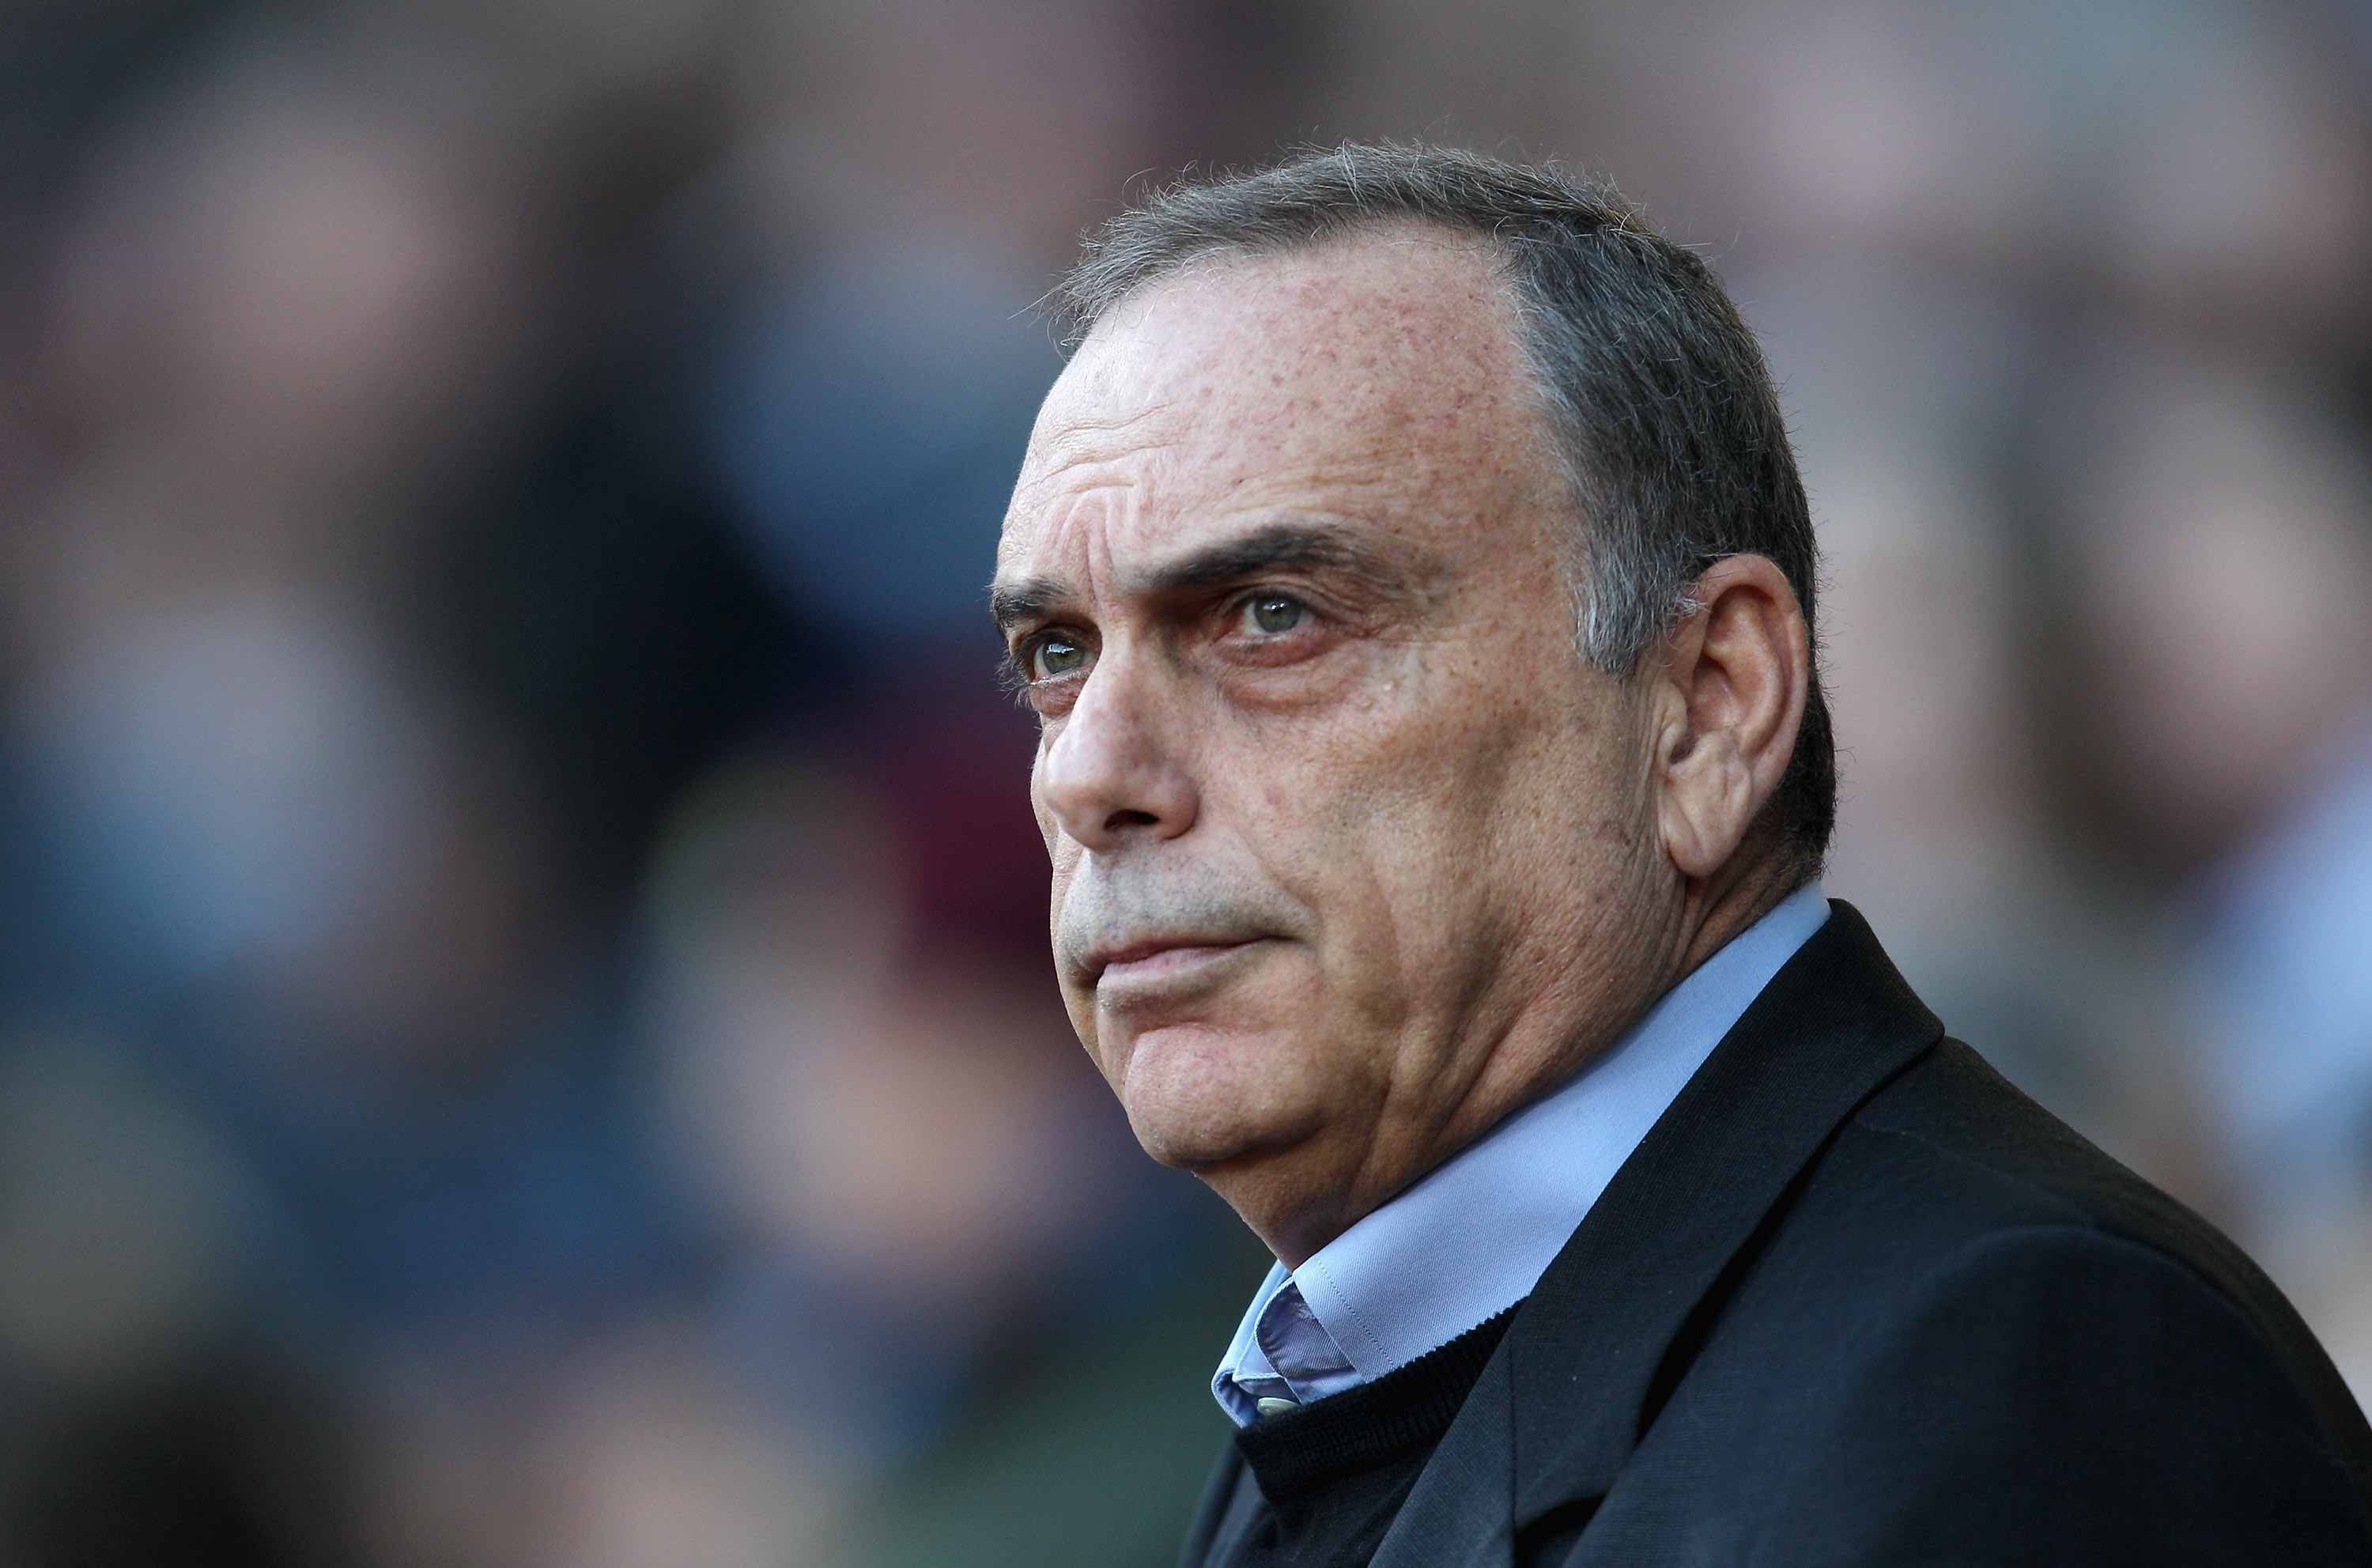 LONDON, ENGLAND - JANUARY 08:  West Ham United manager Avram Grant looks thoughtful during the FA Cup sponsored by E.O.N 3rd Round match between West Ham United and Barnsley at Boleyn Ground on January 8, 2011 in London, England.  (Photo by Paul Gilham/Ge